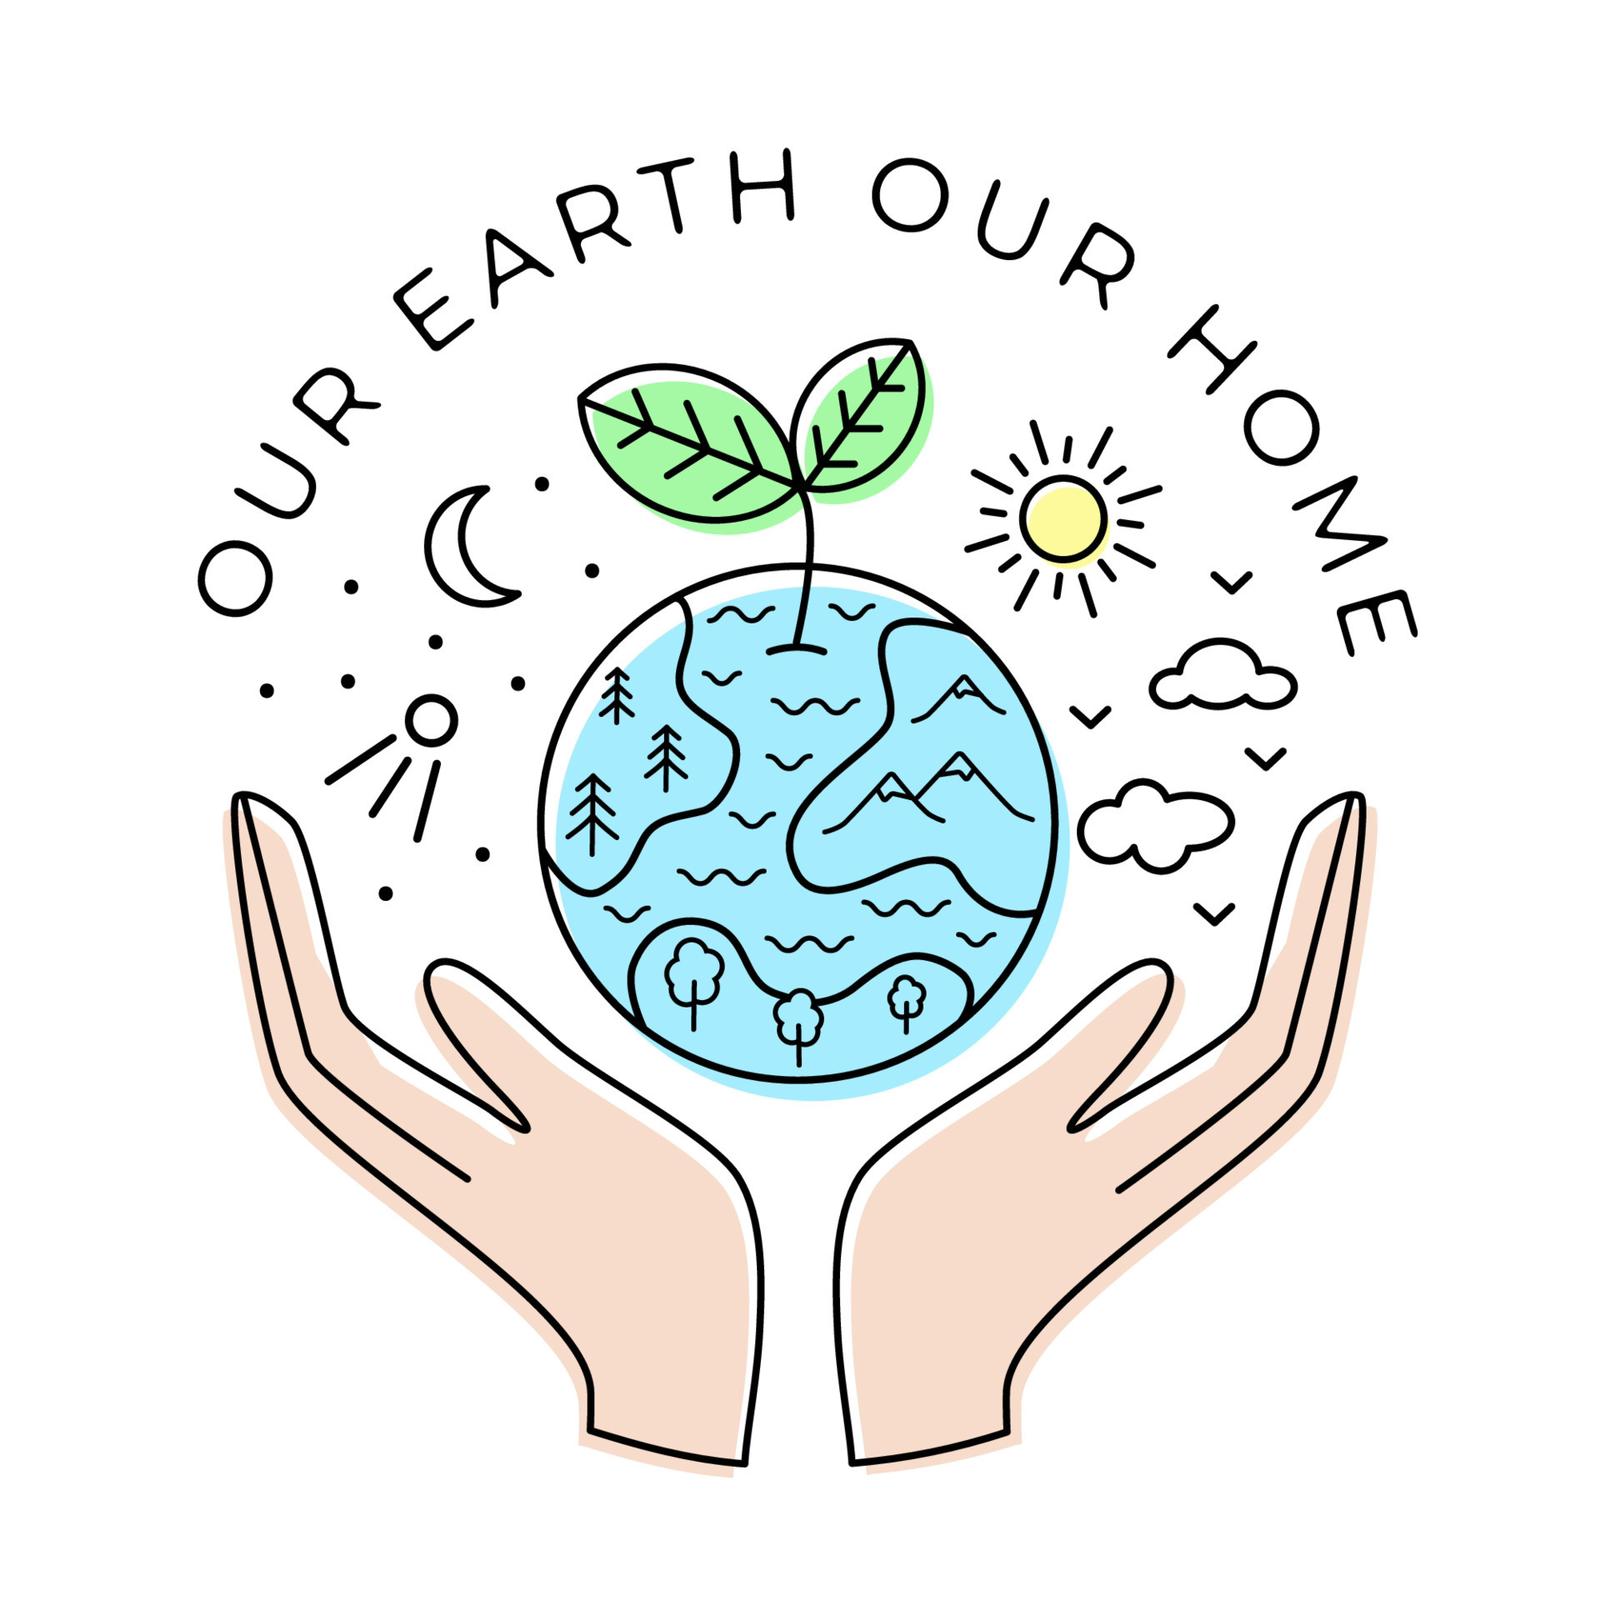 Our Planet, Our Home: A Call for Action